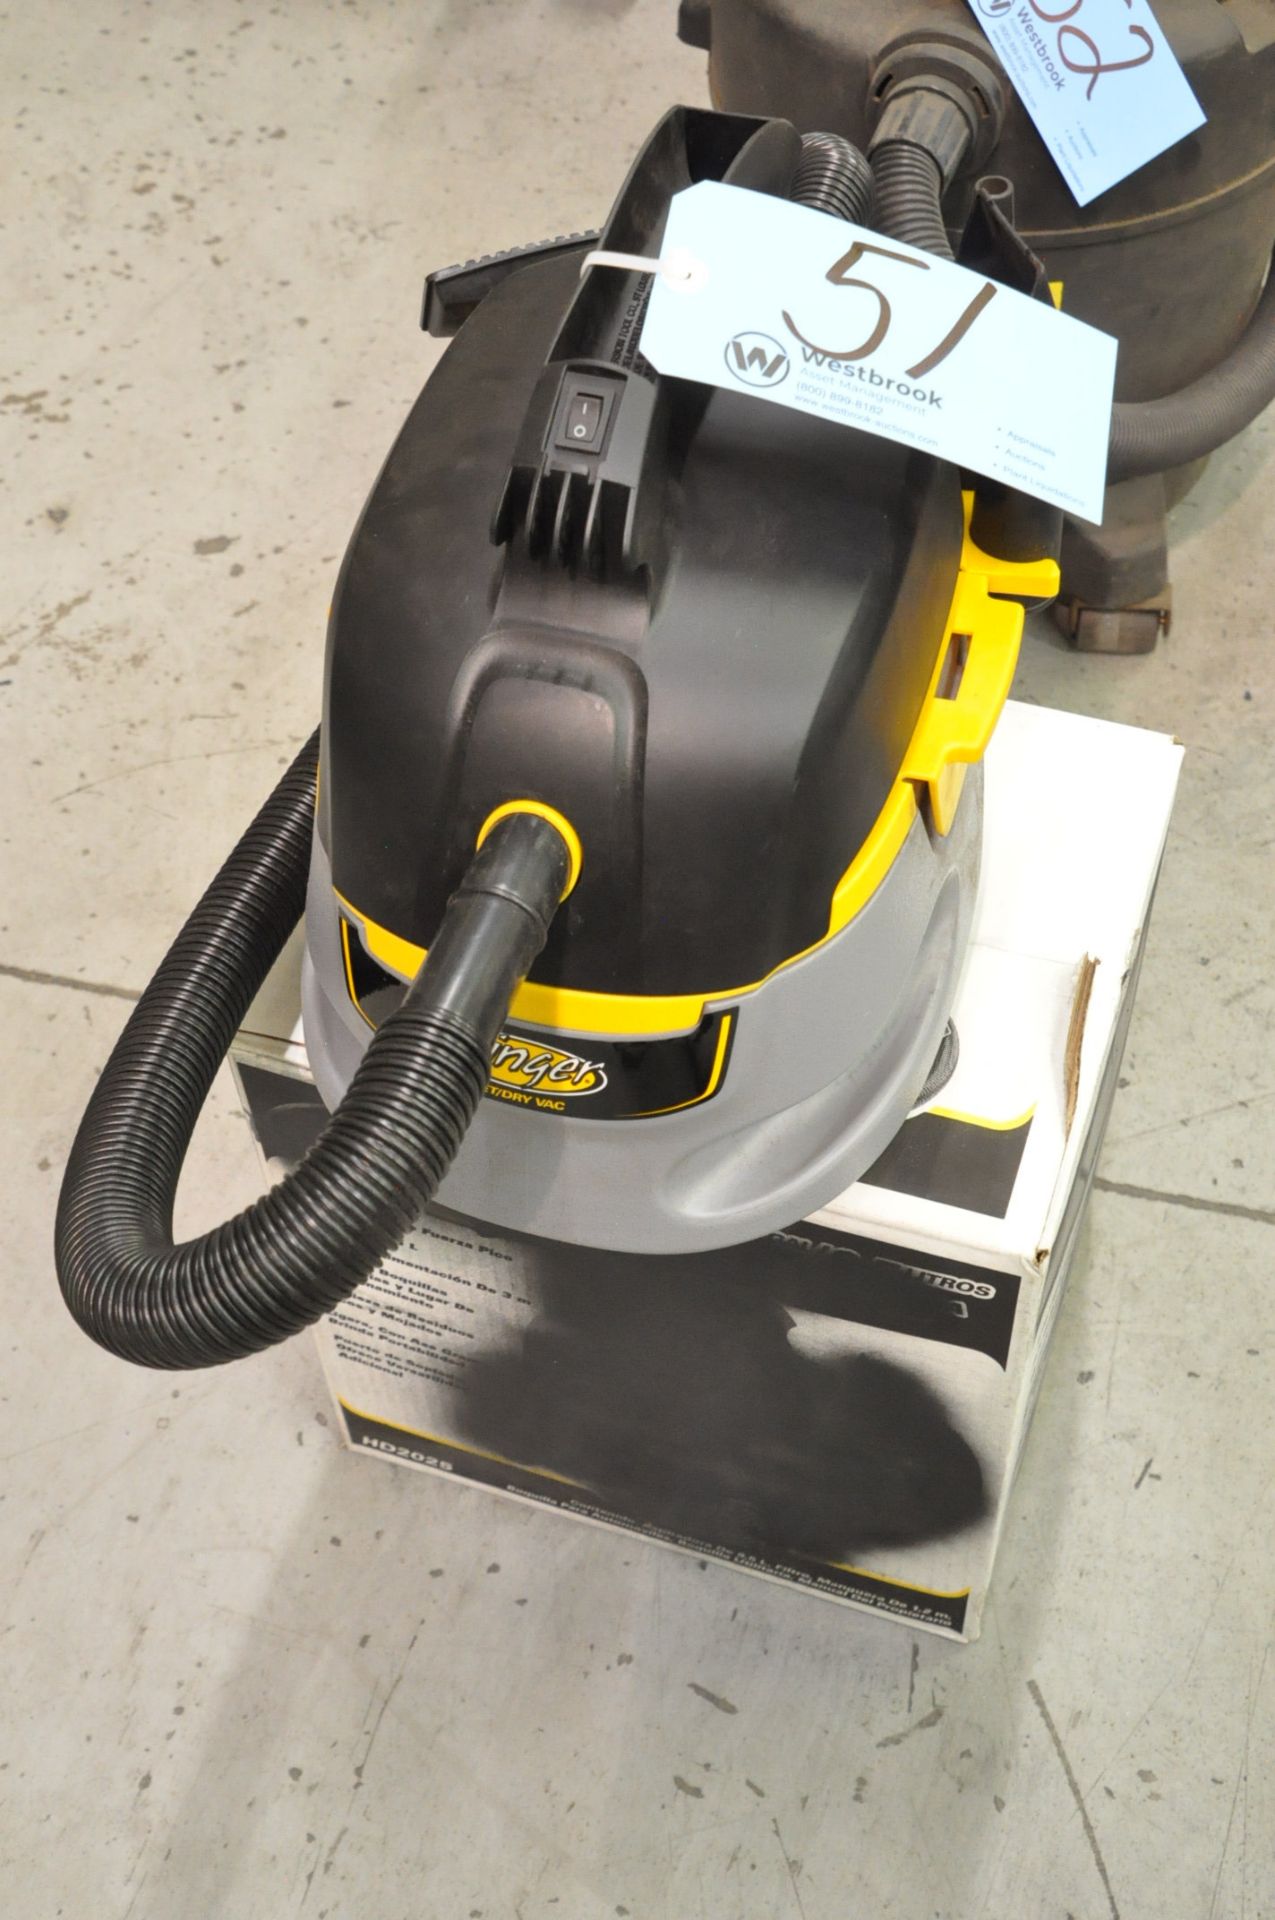 Stinger Wet/Dry Shop Vac with Hose and Attachments, (Bldg 1)